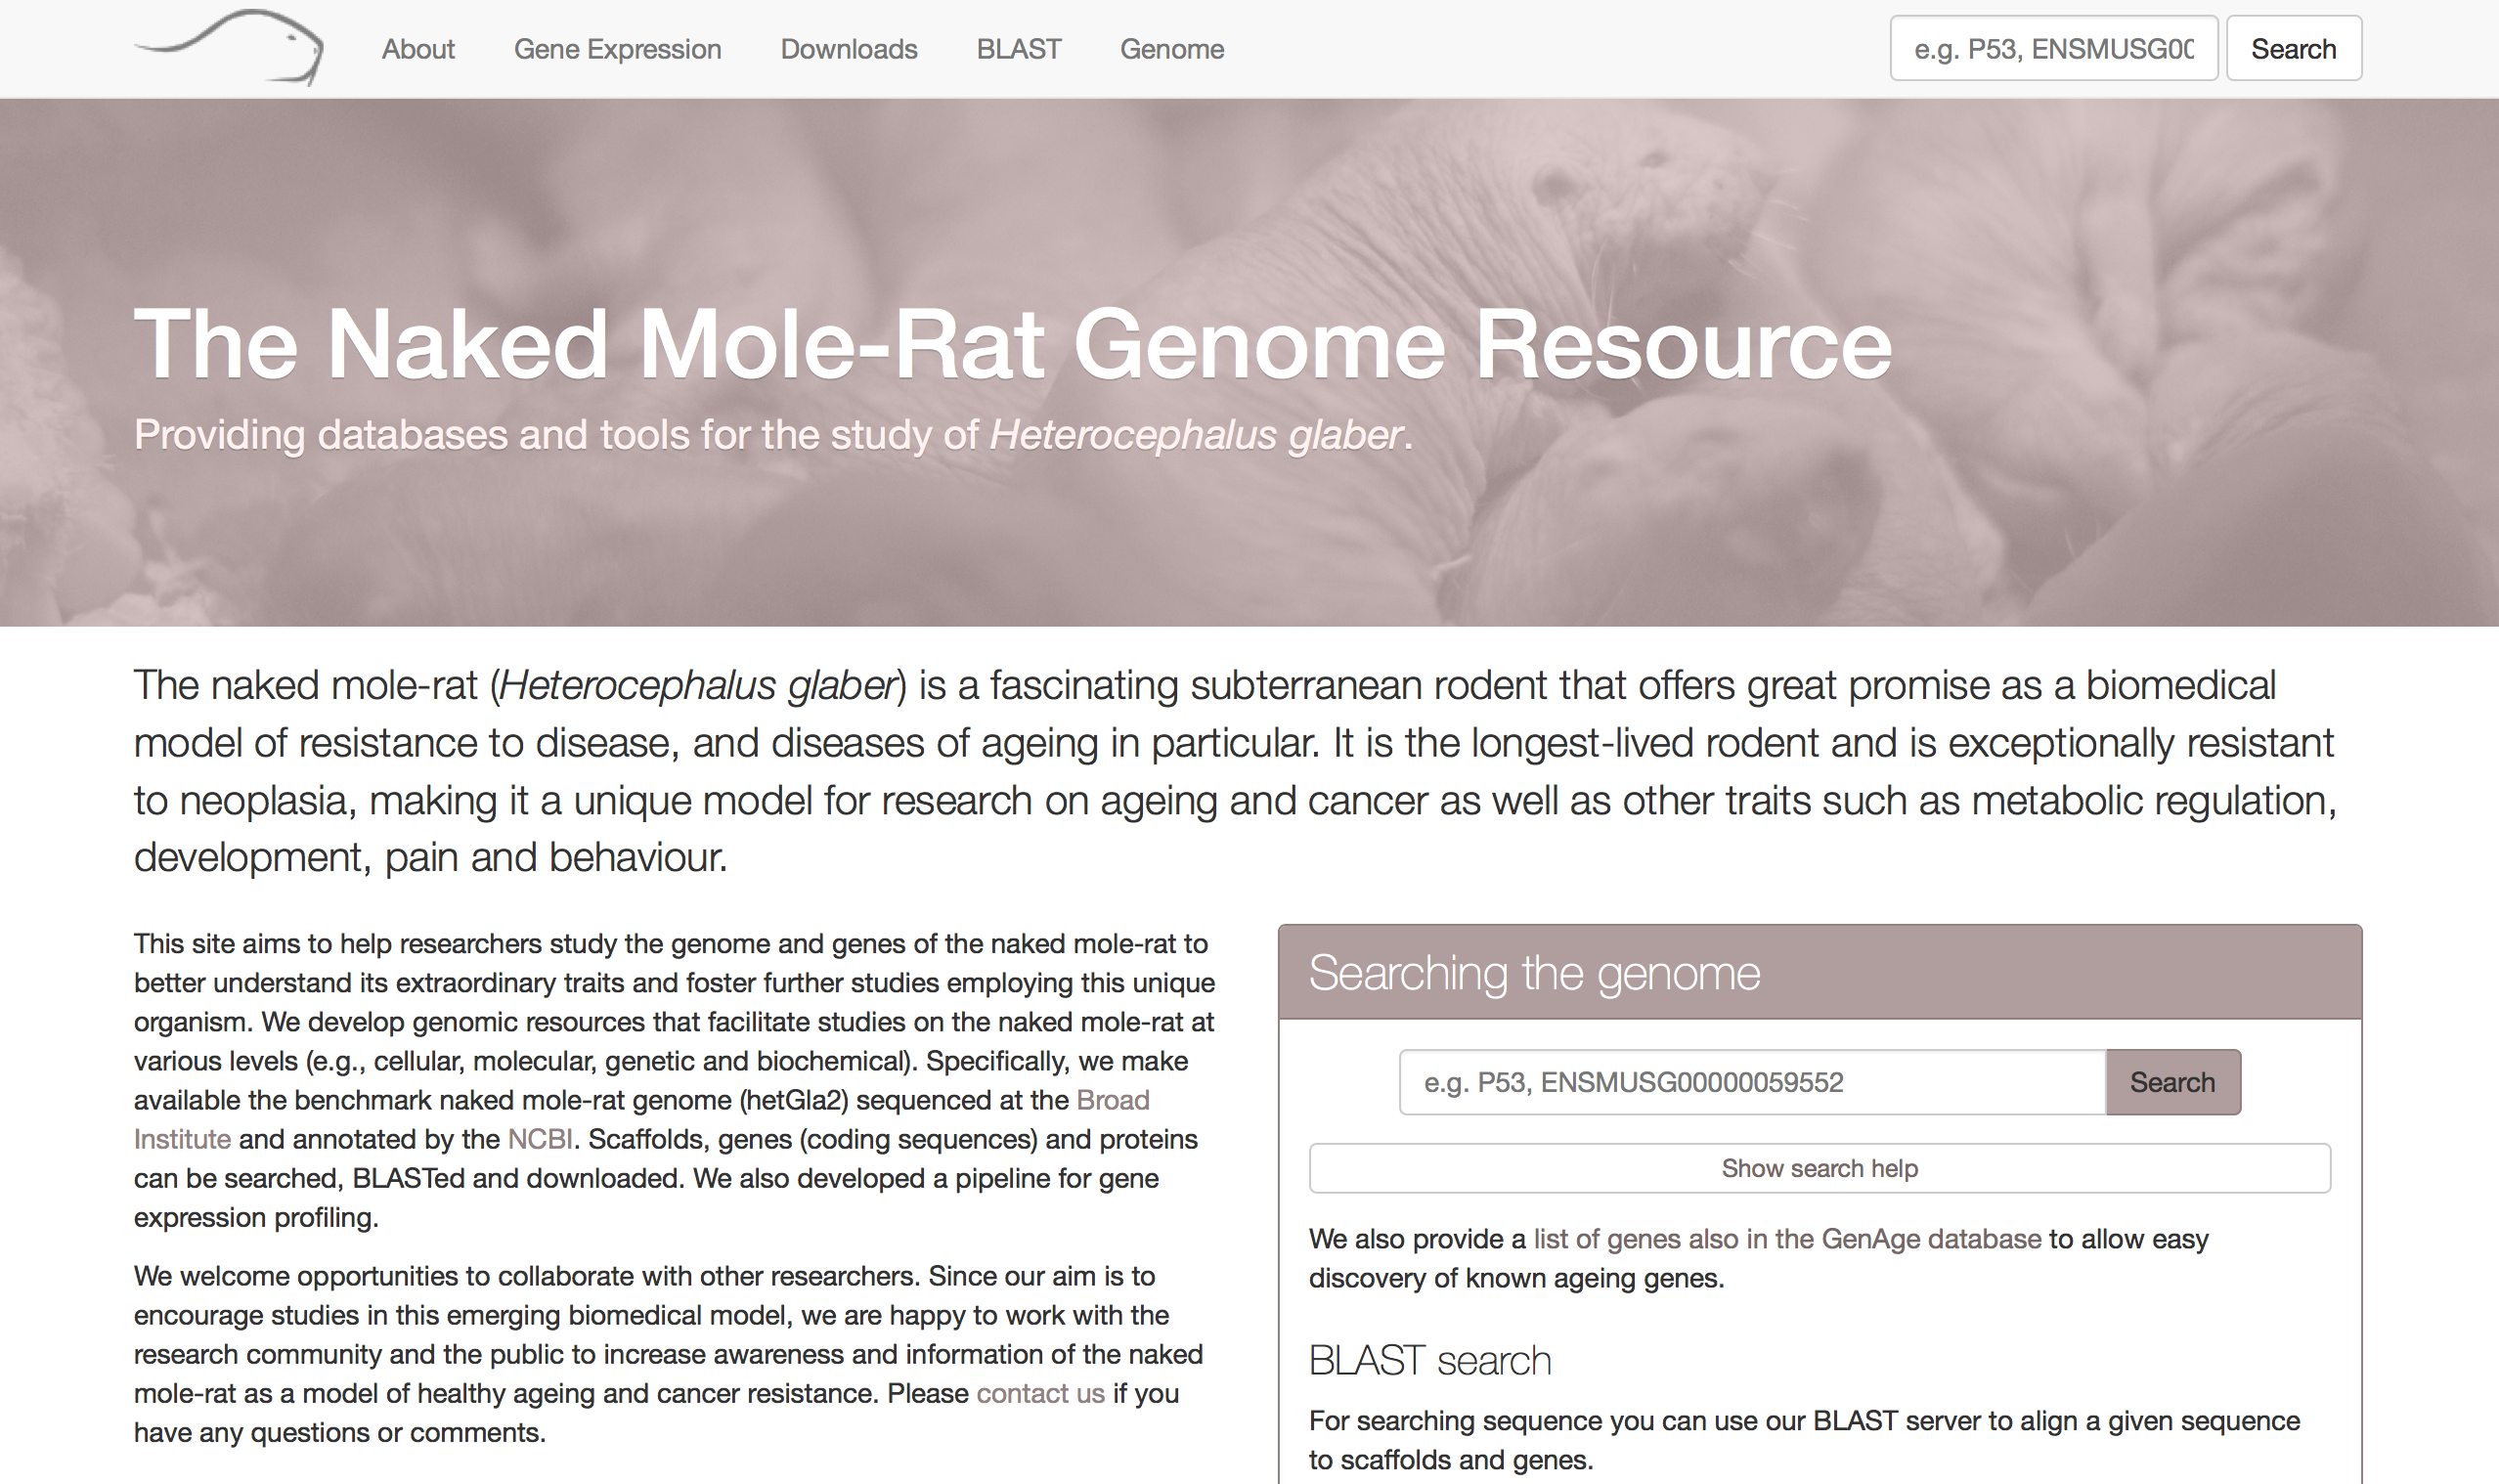 Naked Mole-rat genome resource homepage